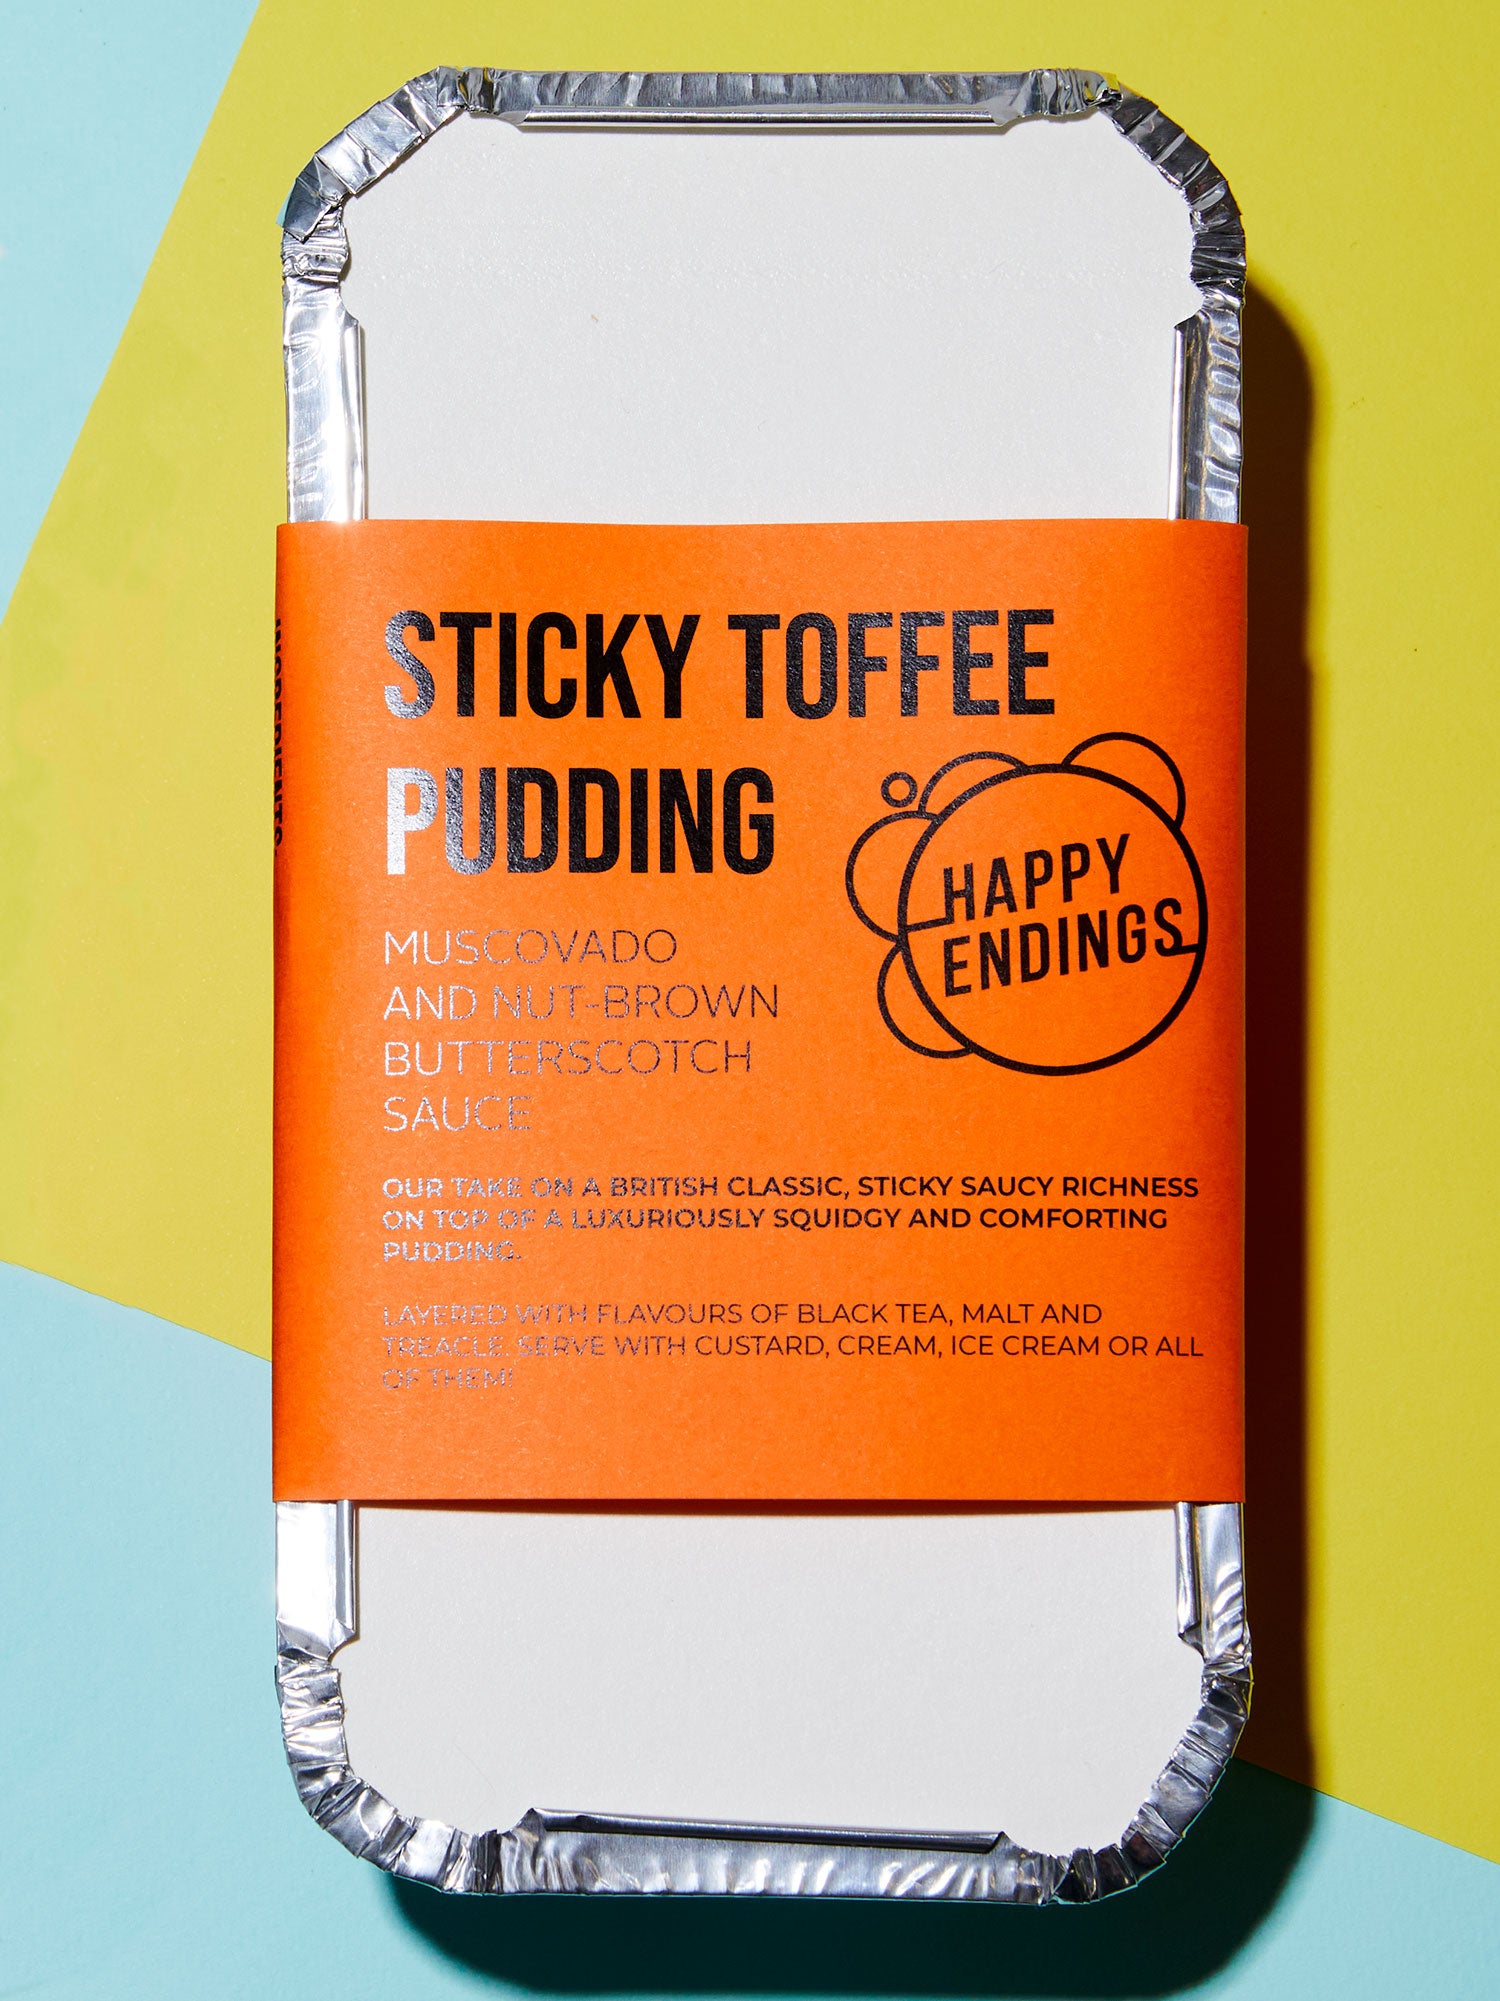 Sticky Toffee Pudding by Happy Endings